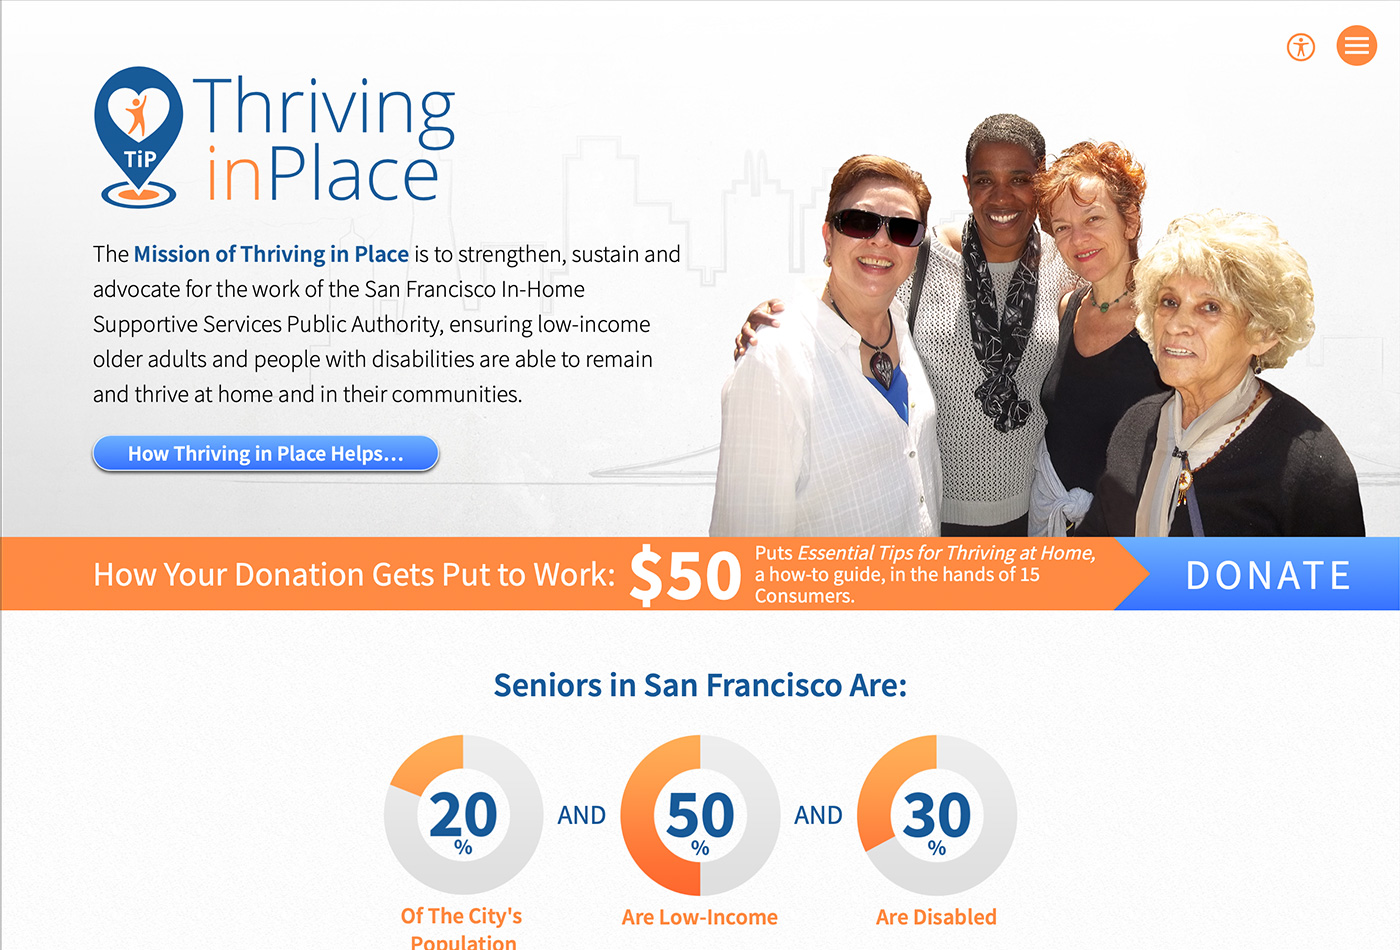 Screenshot of the Thriving in Place website.